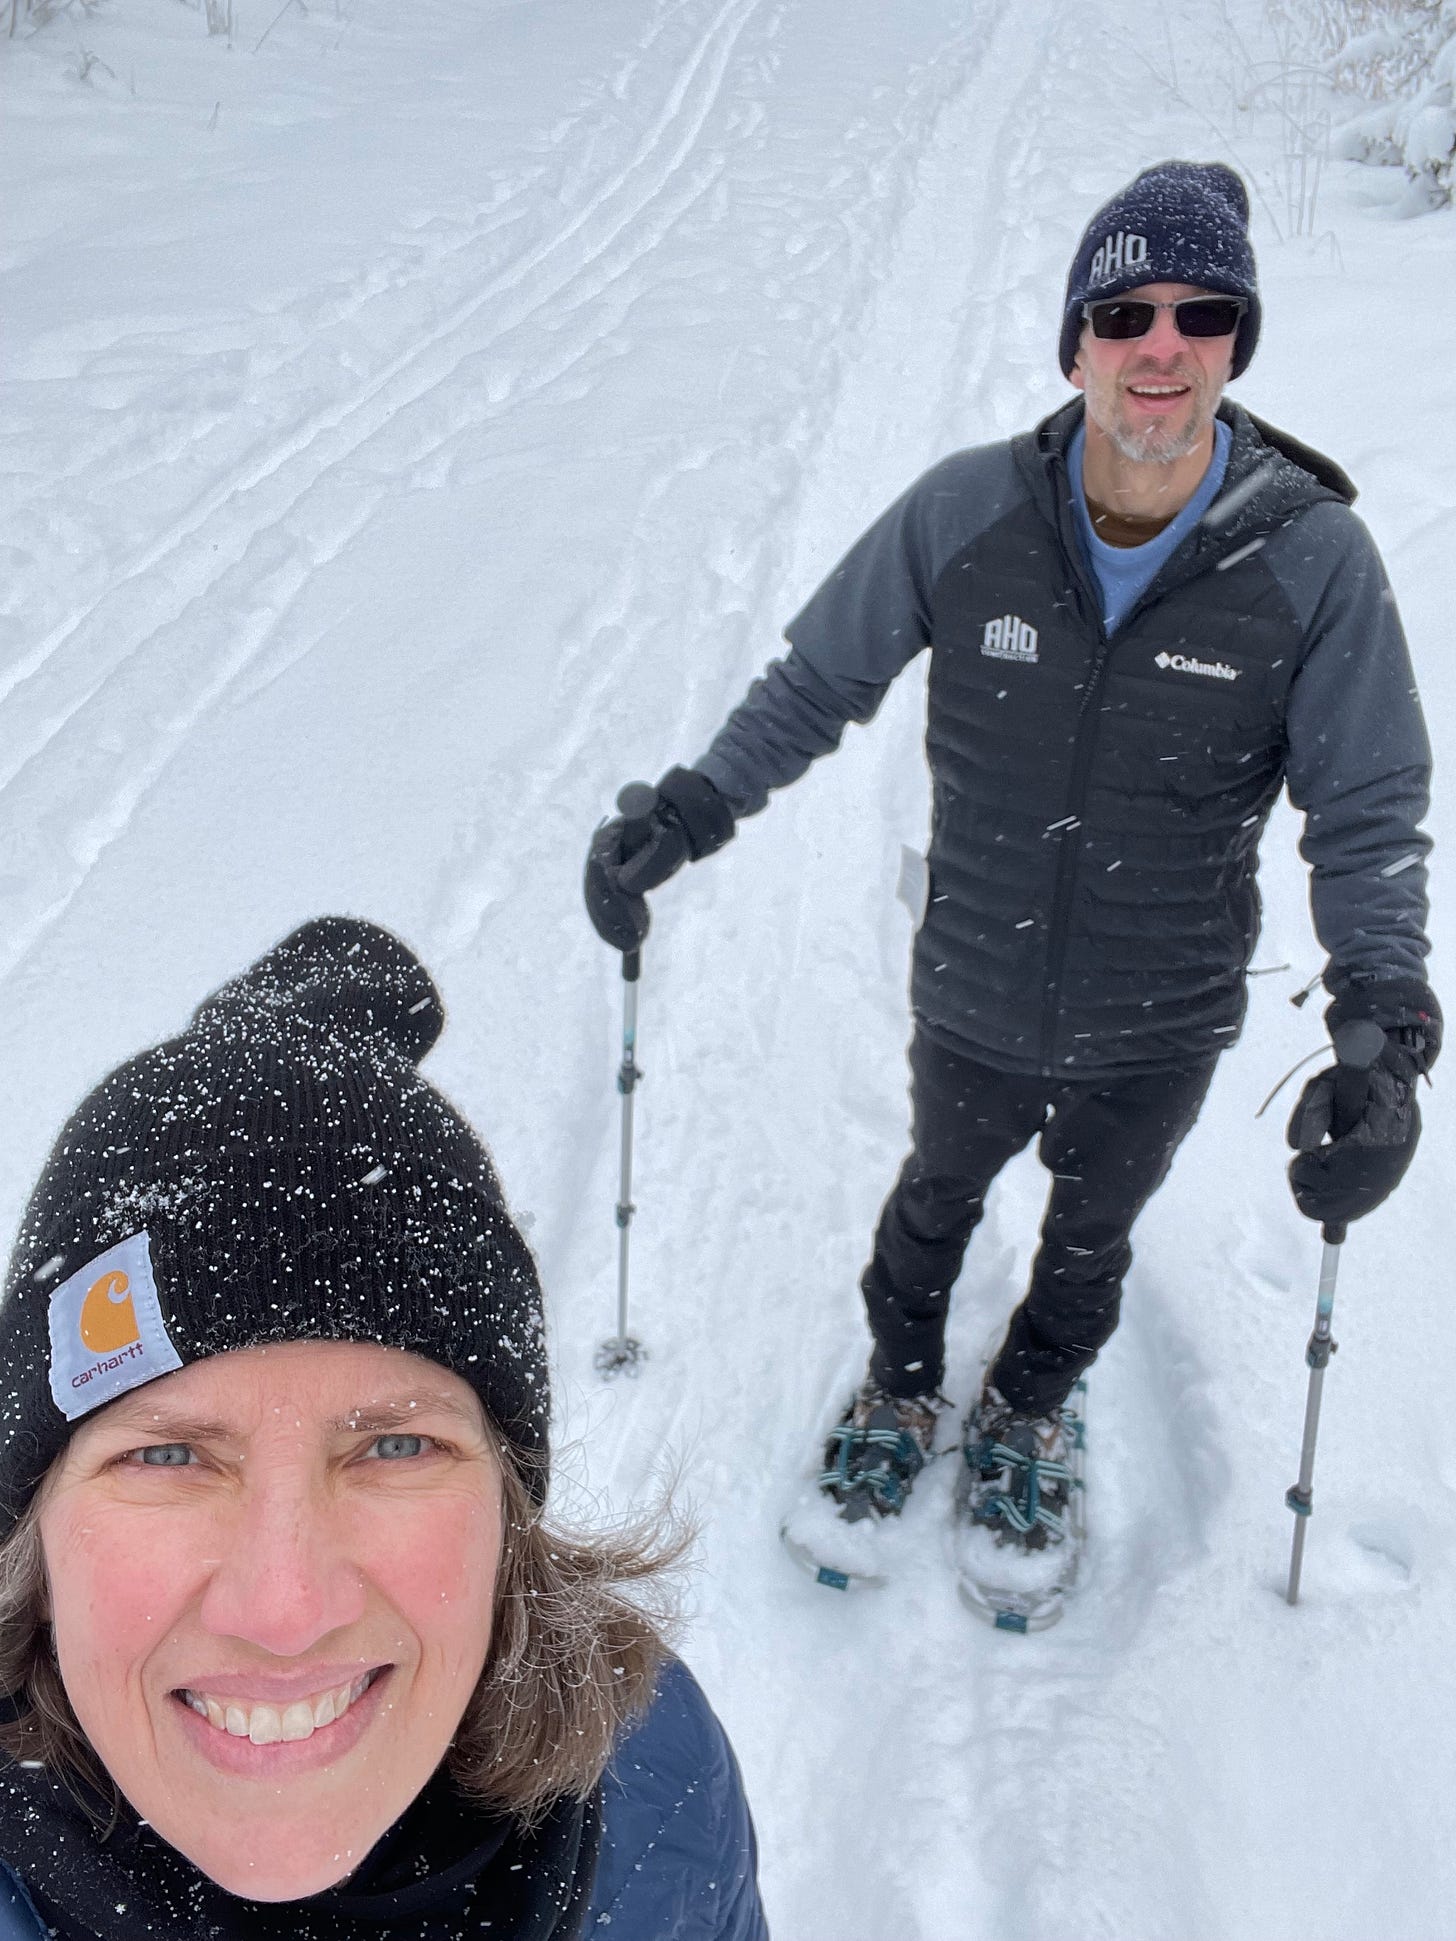 A woman and man on snowshoes in deep snow